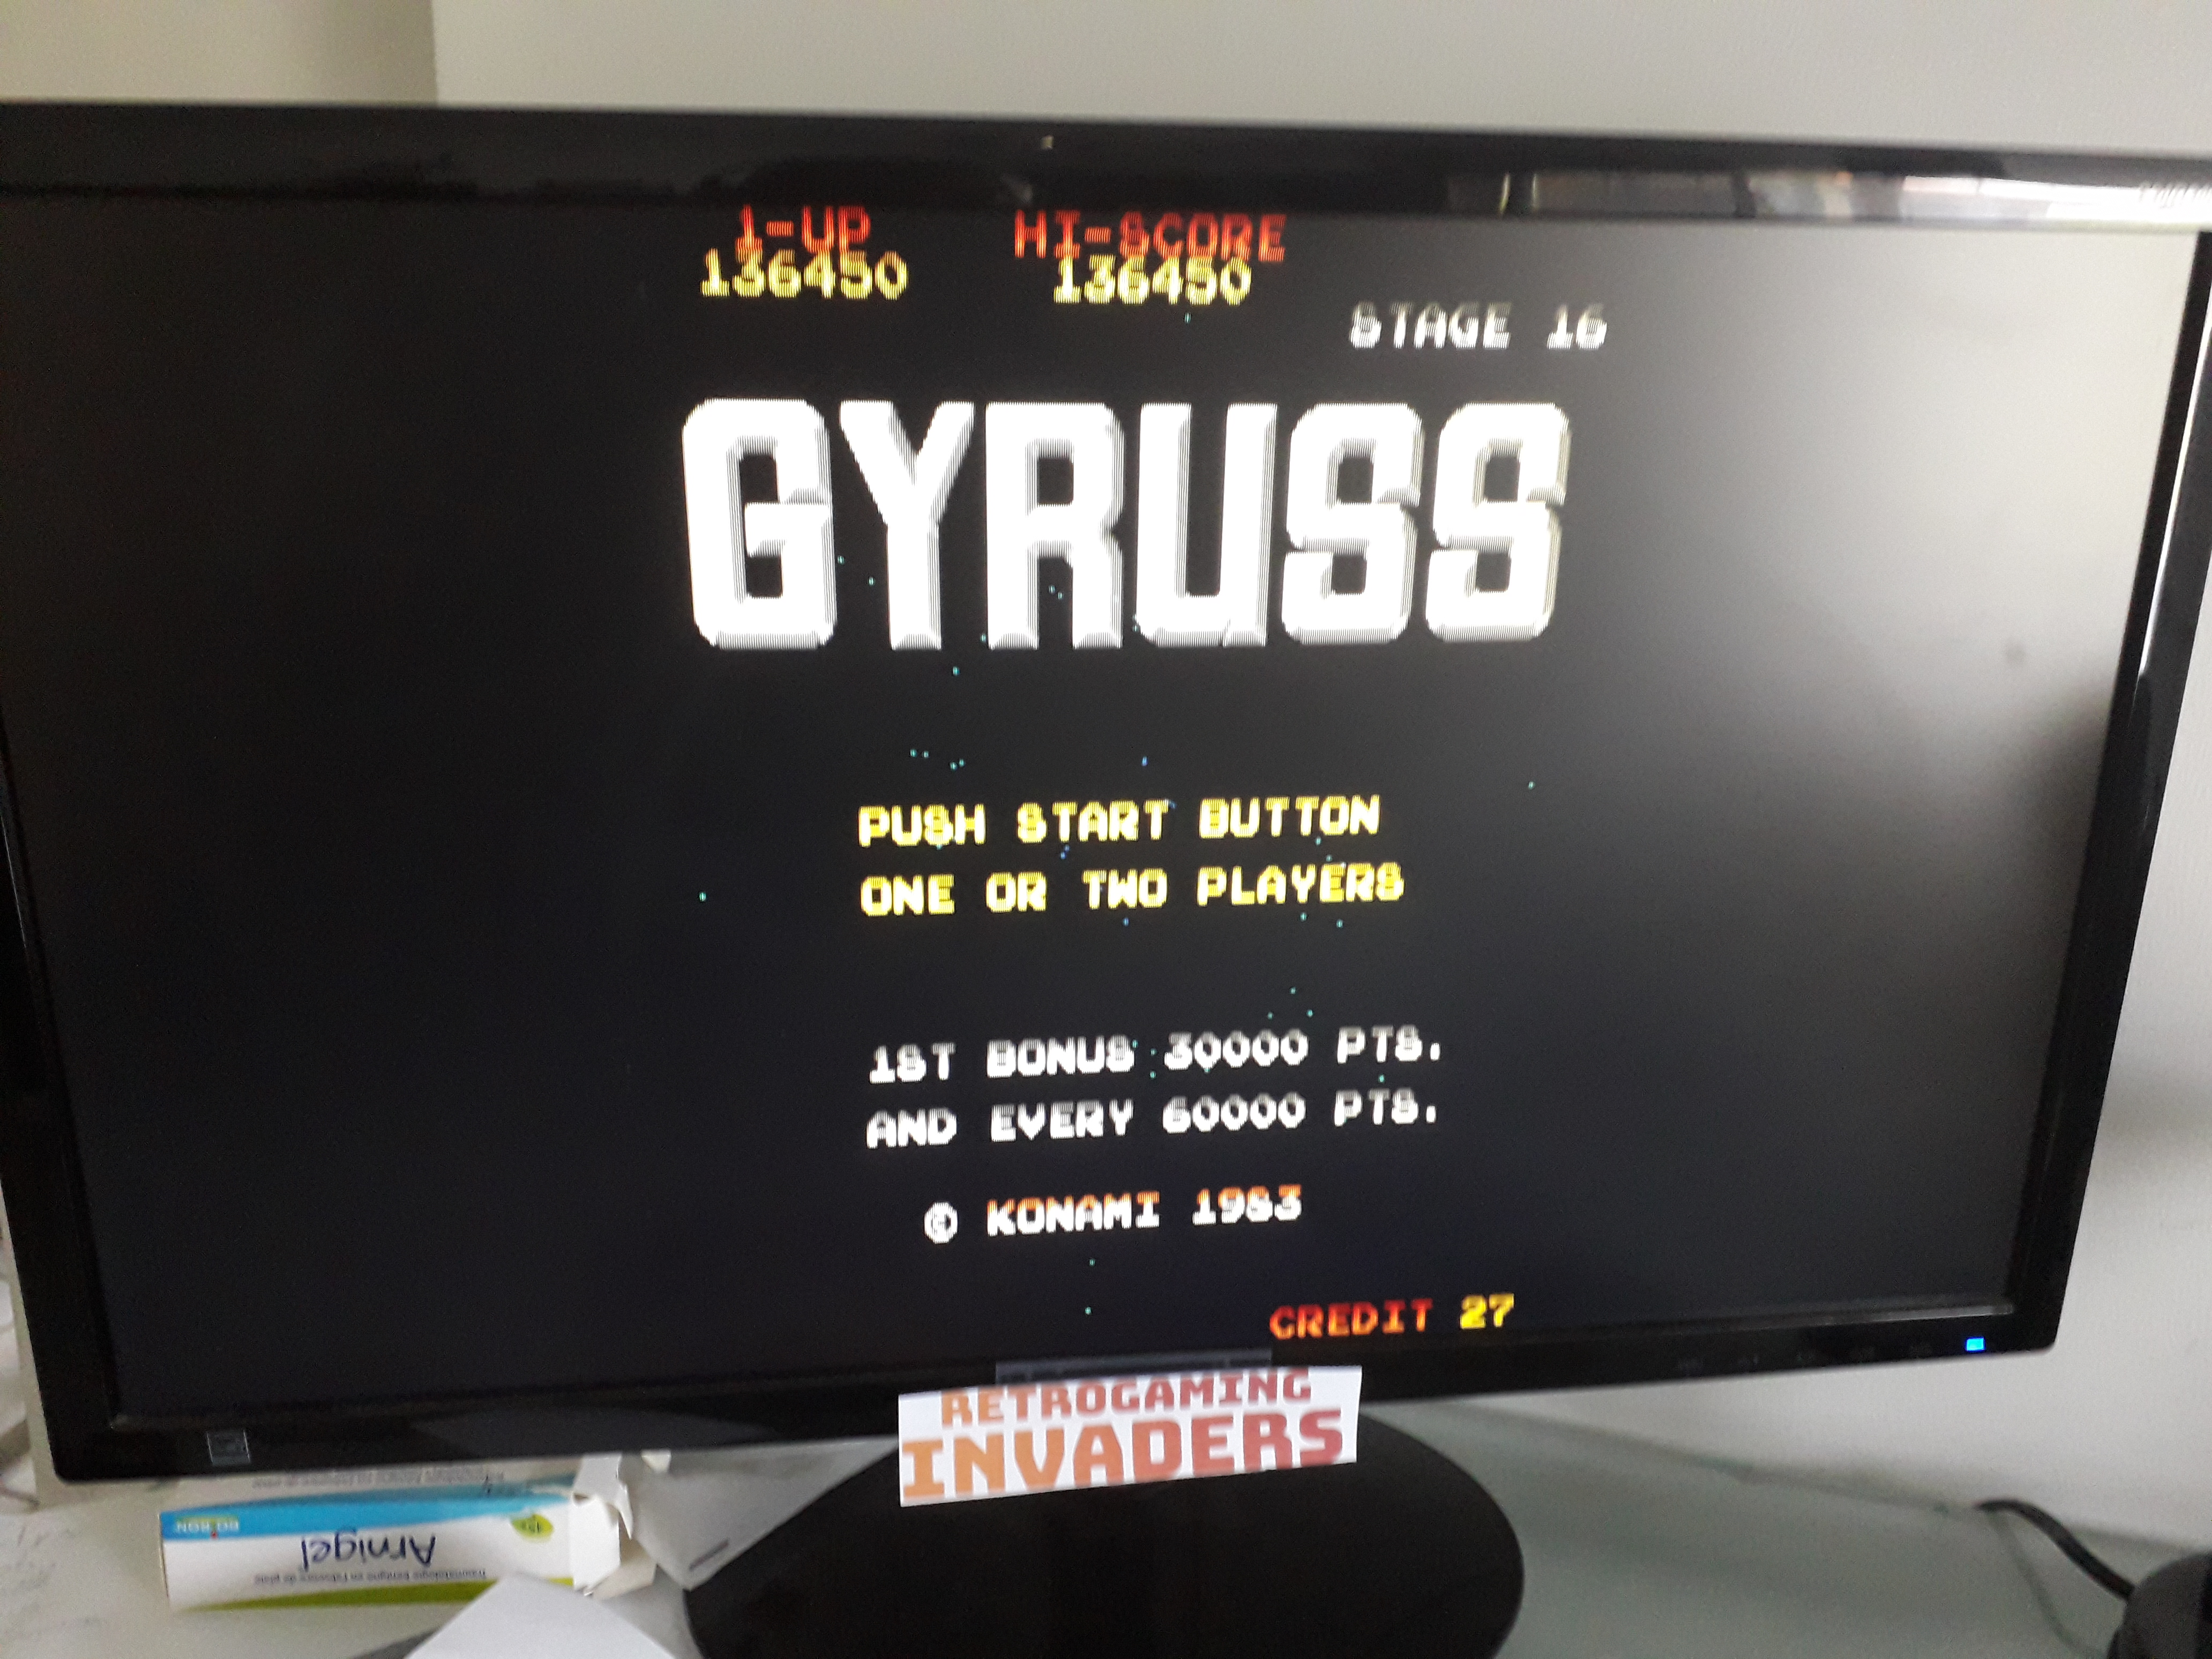 retrogaminginvaders: Gyruss (Arcade Emulated / M.A.M.E.) 136,450 points on 2019-07-01 01:58:41